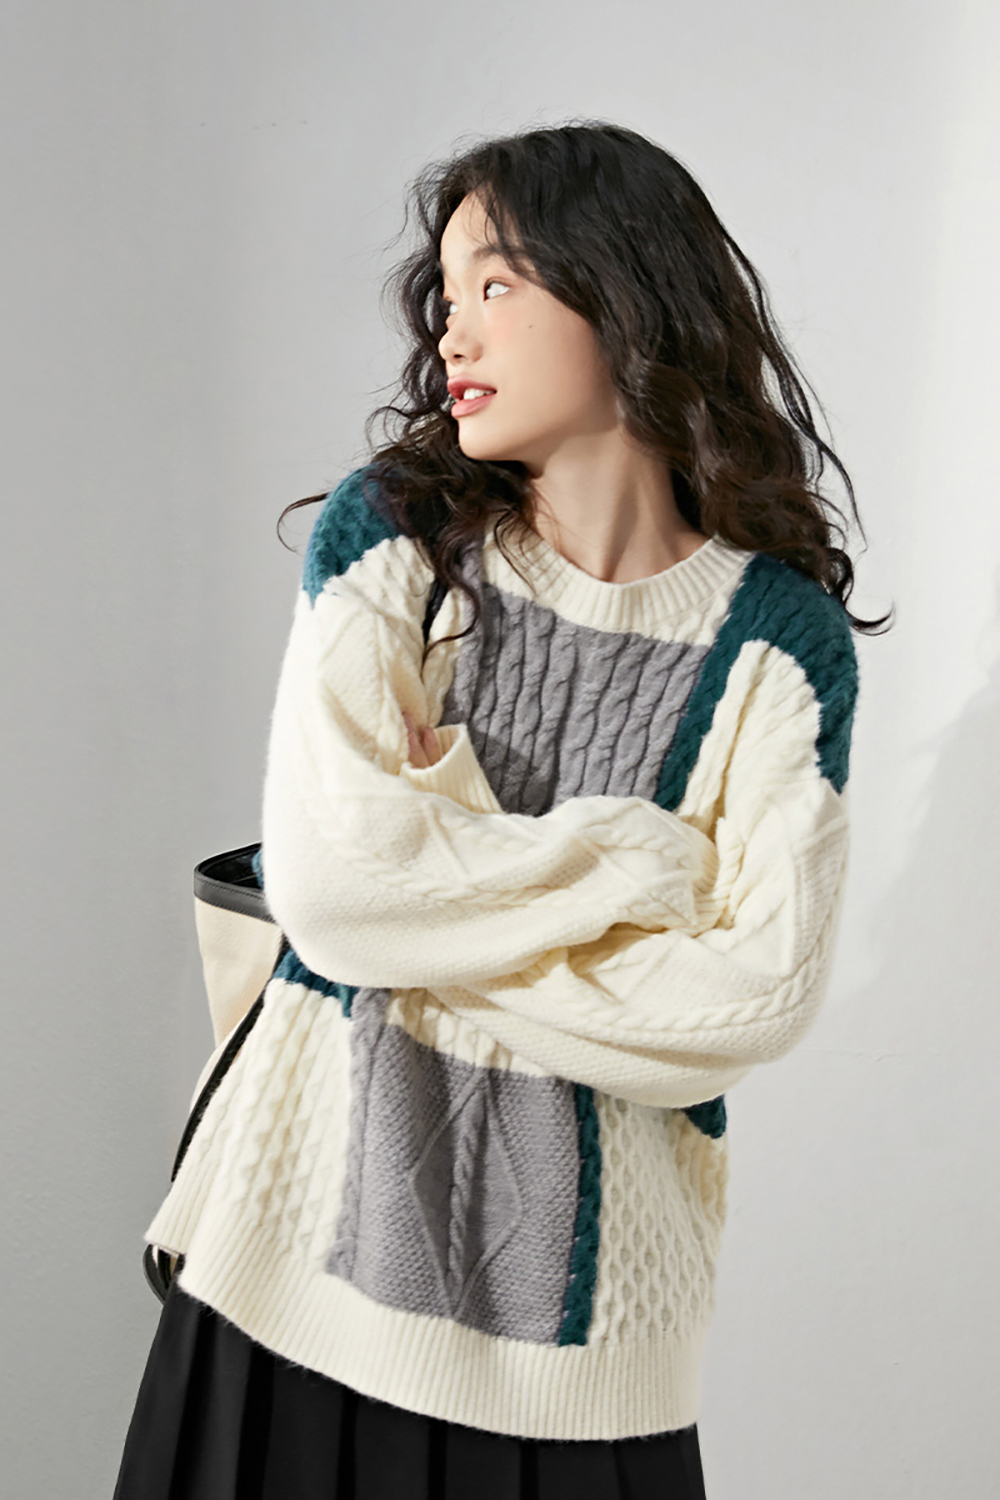 Contrast knit sweater Autumn and winter Relaxed and lazy style